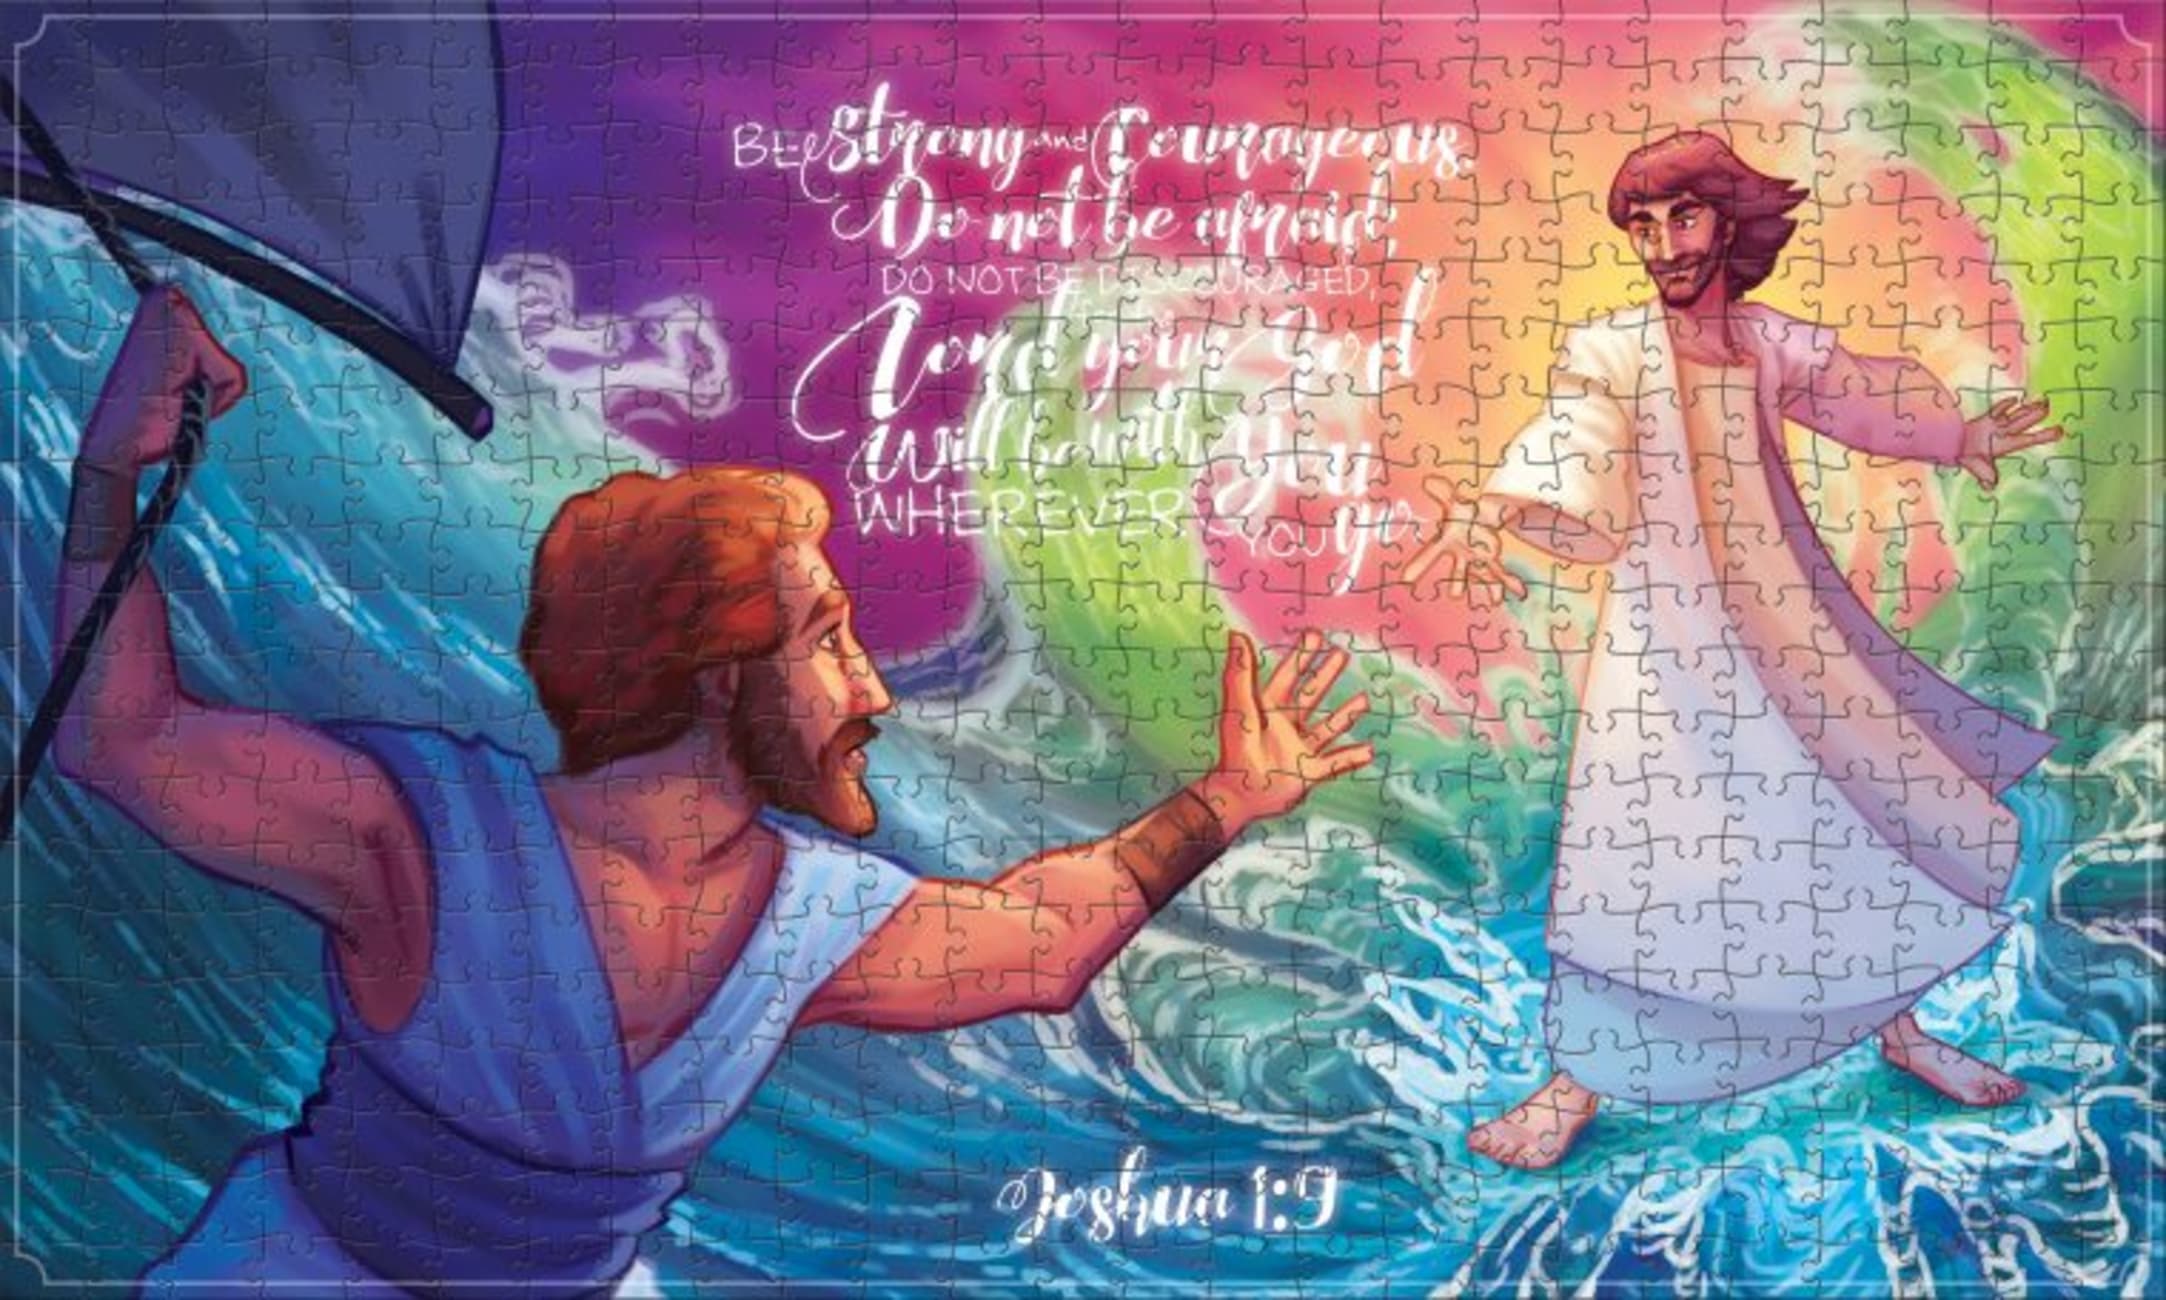 Bible Jigsaw Puzzle: Jesus Walks on Water (500 Pieces) Game